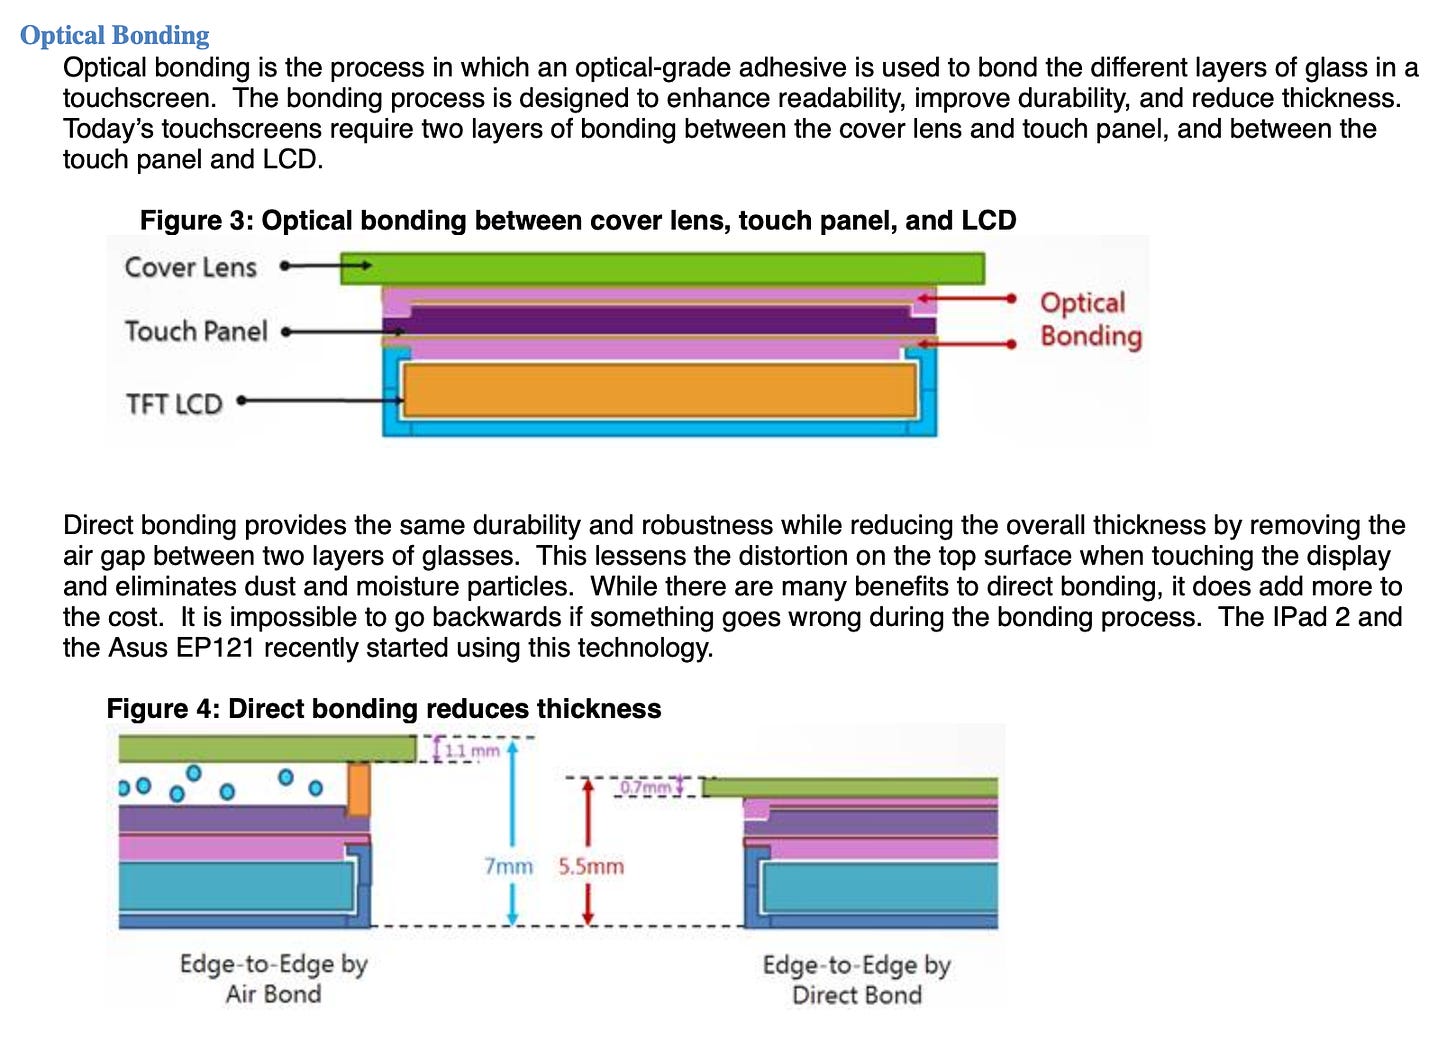 Optical bonding is the process in which an optical-grade adhesive is used to bond the different layers of glass in a touchscreen. The bonding process is designed to enhance readability, improve durability, and reduce thickness. Today's touchscreens require two layers of bonding between the cover lens and touch panel, and between the touch panel and LCD. Figure 3: Optical bonding between cover lens, touch panel, and LCD Cover Lens Touch Panel Optical Bonding TET LCD' Direct bonding provides the same durability and robustness while reducing the overall thickness by removing the air gap between two layers of glasses. This lessens the distortion on the top surface when touching the display and eliminates dust and moisture particles. While there are many benefits to direct bonding, it does add more to the cost. It is impossible to go backwards if something goes wrong during the bonding process. The IPad 2 and the Asus EP121 recently started using this technology.